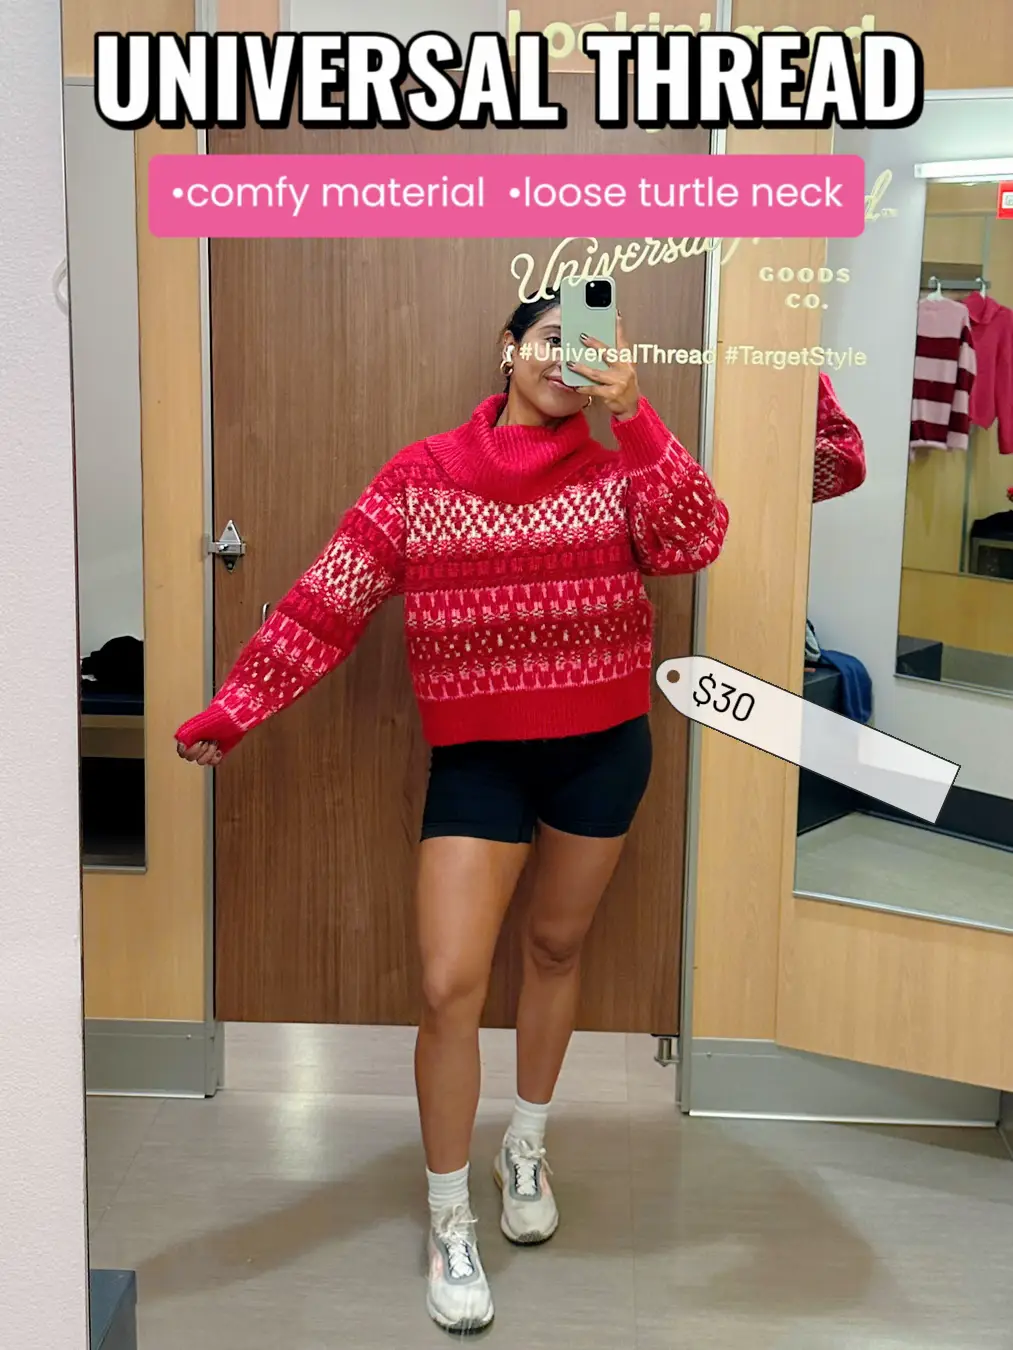  A woman in a red sweater and black shorts is taking a selfie in a mirror.